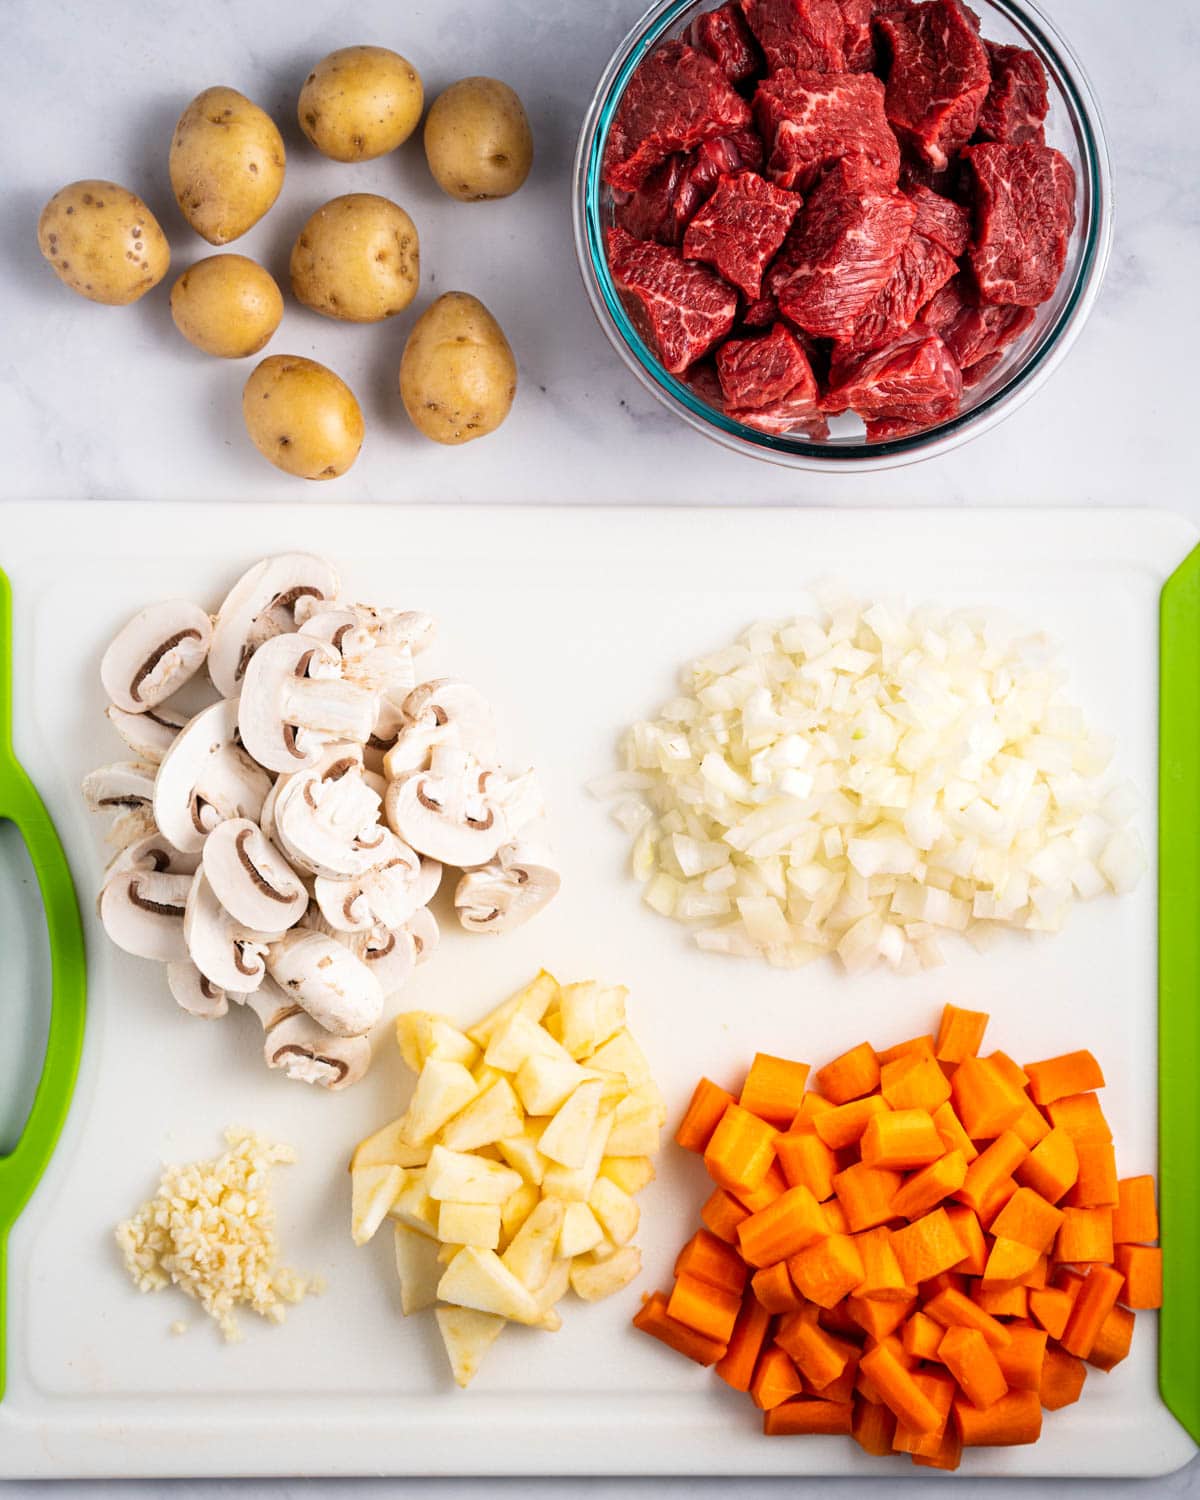 Cutting board with sliced mushrooms, diced onions, carrots, apples, and minced garlic. Bowl of beef cut into cubes.